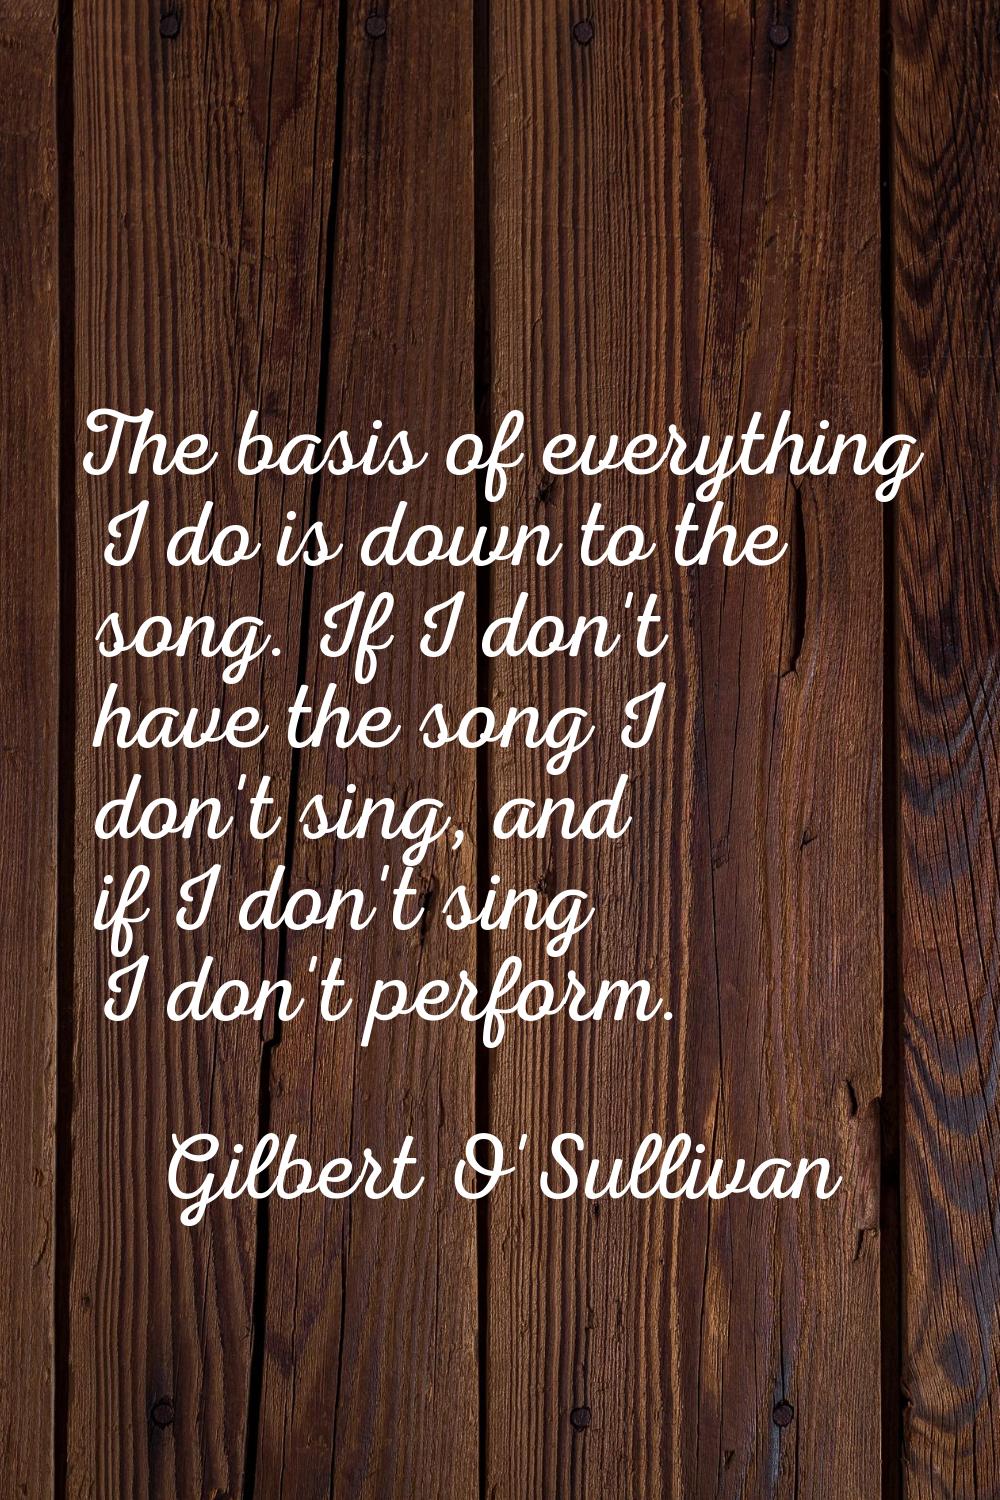 The basis of everything I do is down to the song. If I don't have the song I don't sing, and if I d